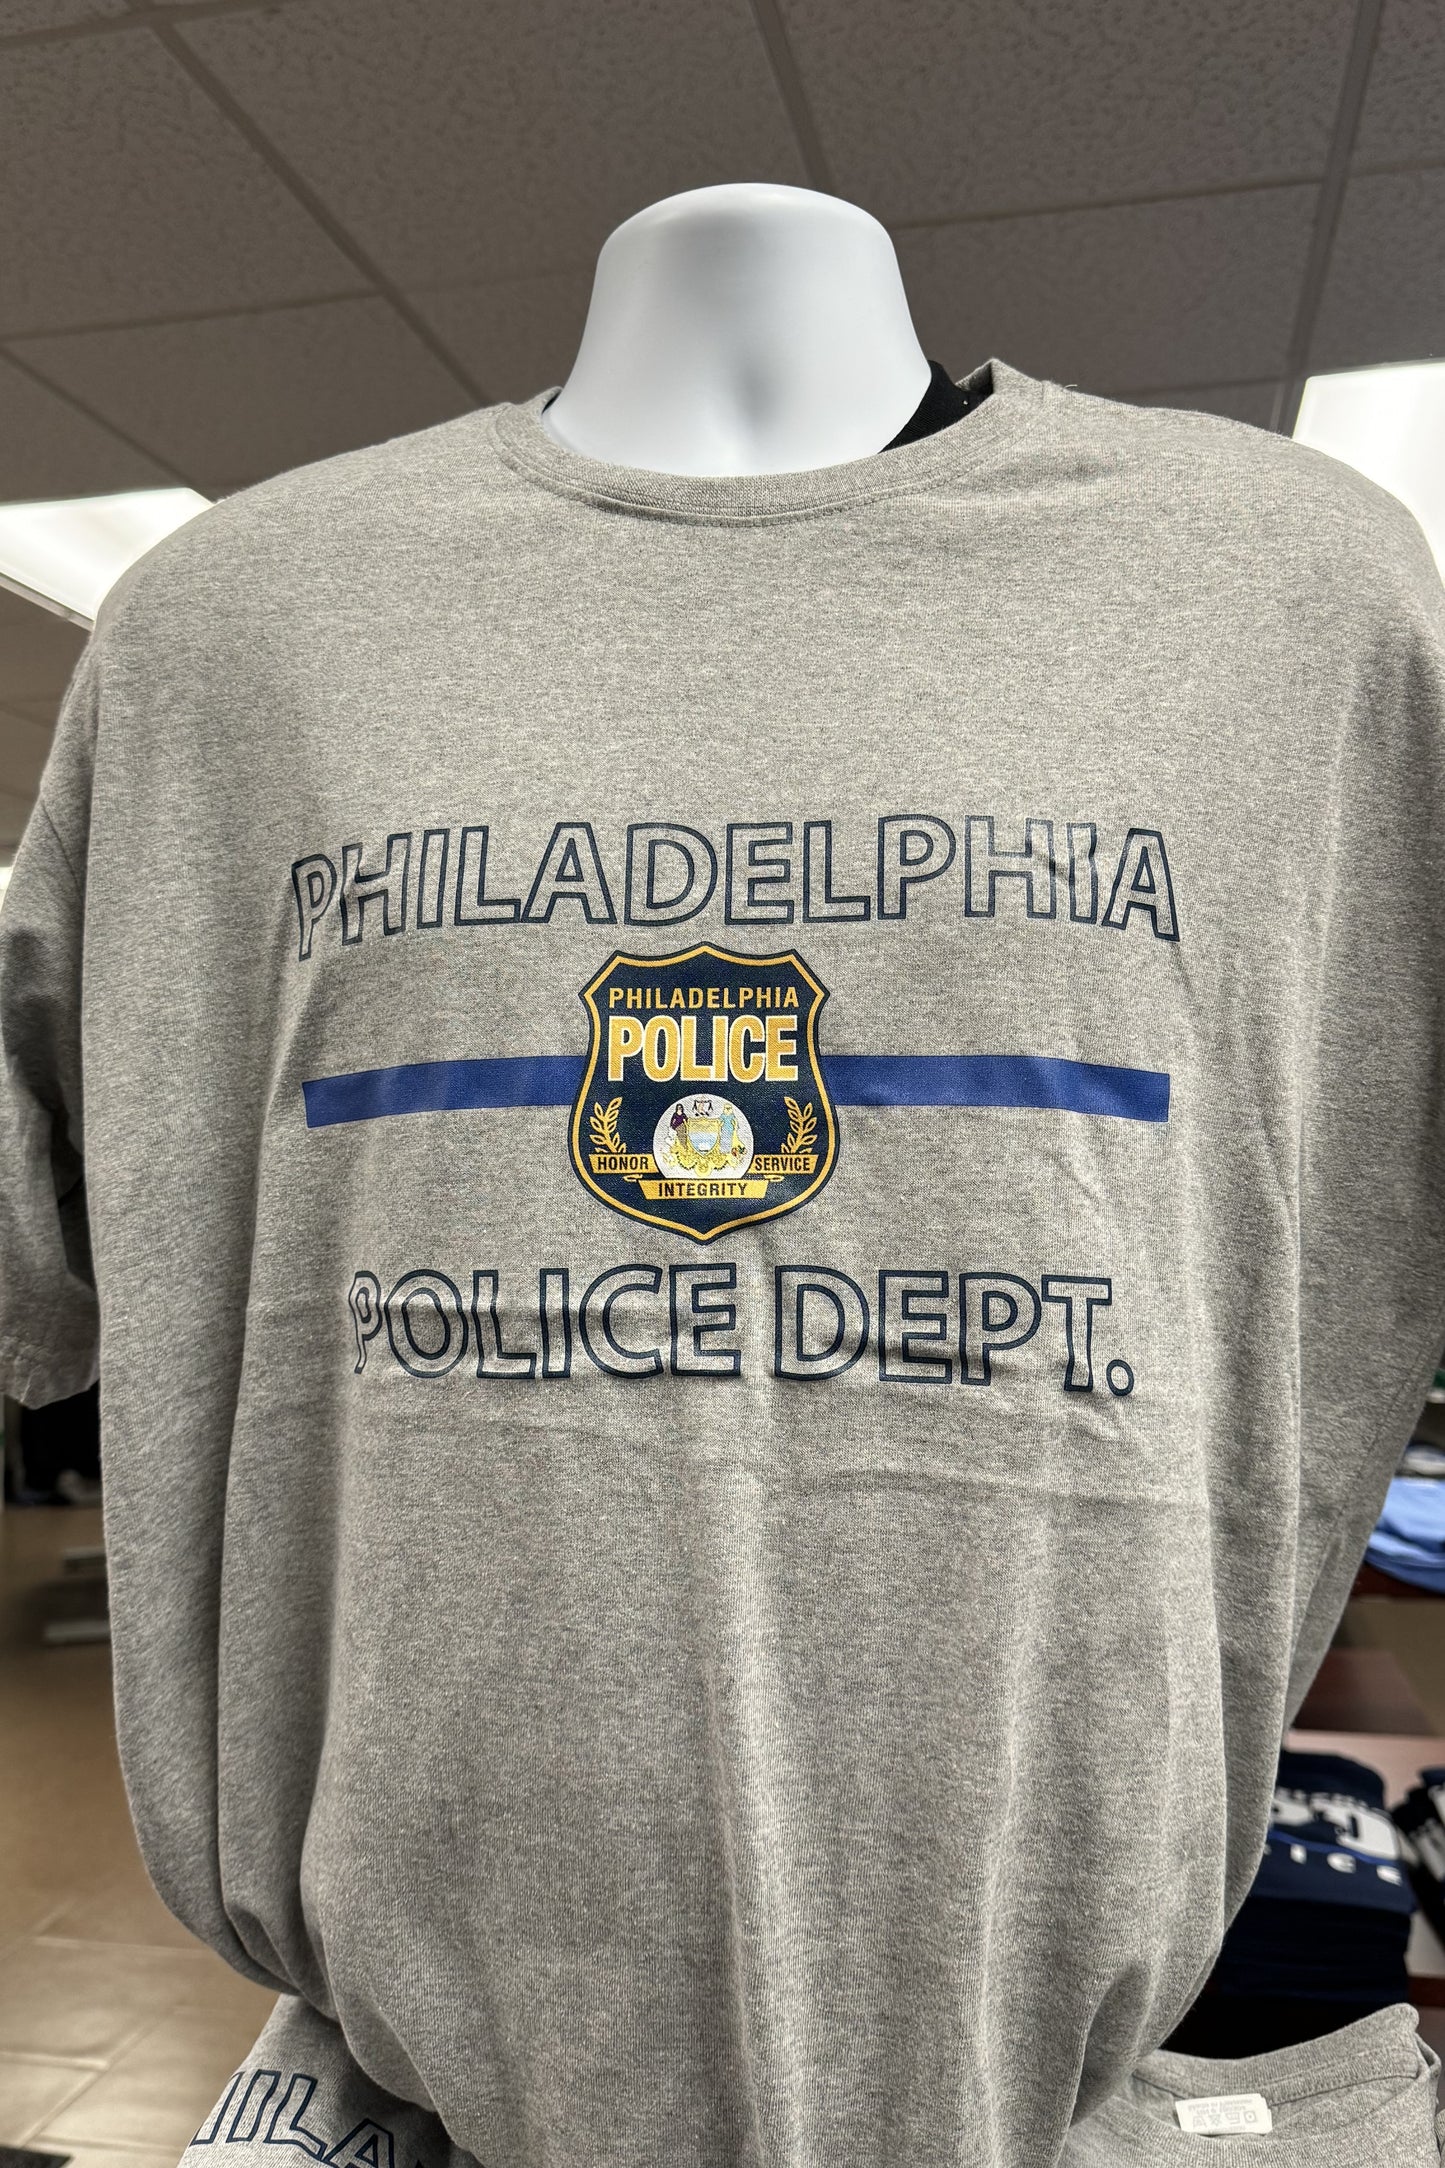 A New FOP OR PPD Thin Blue Line T-Shirt